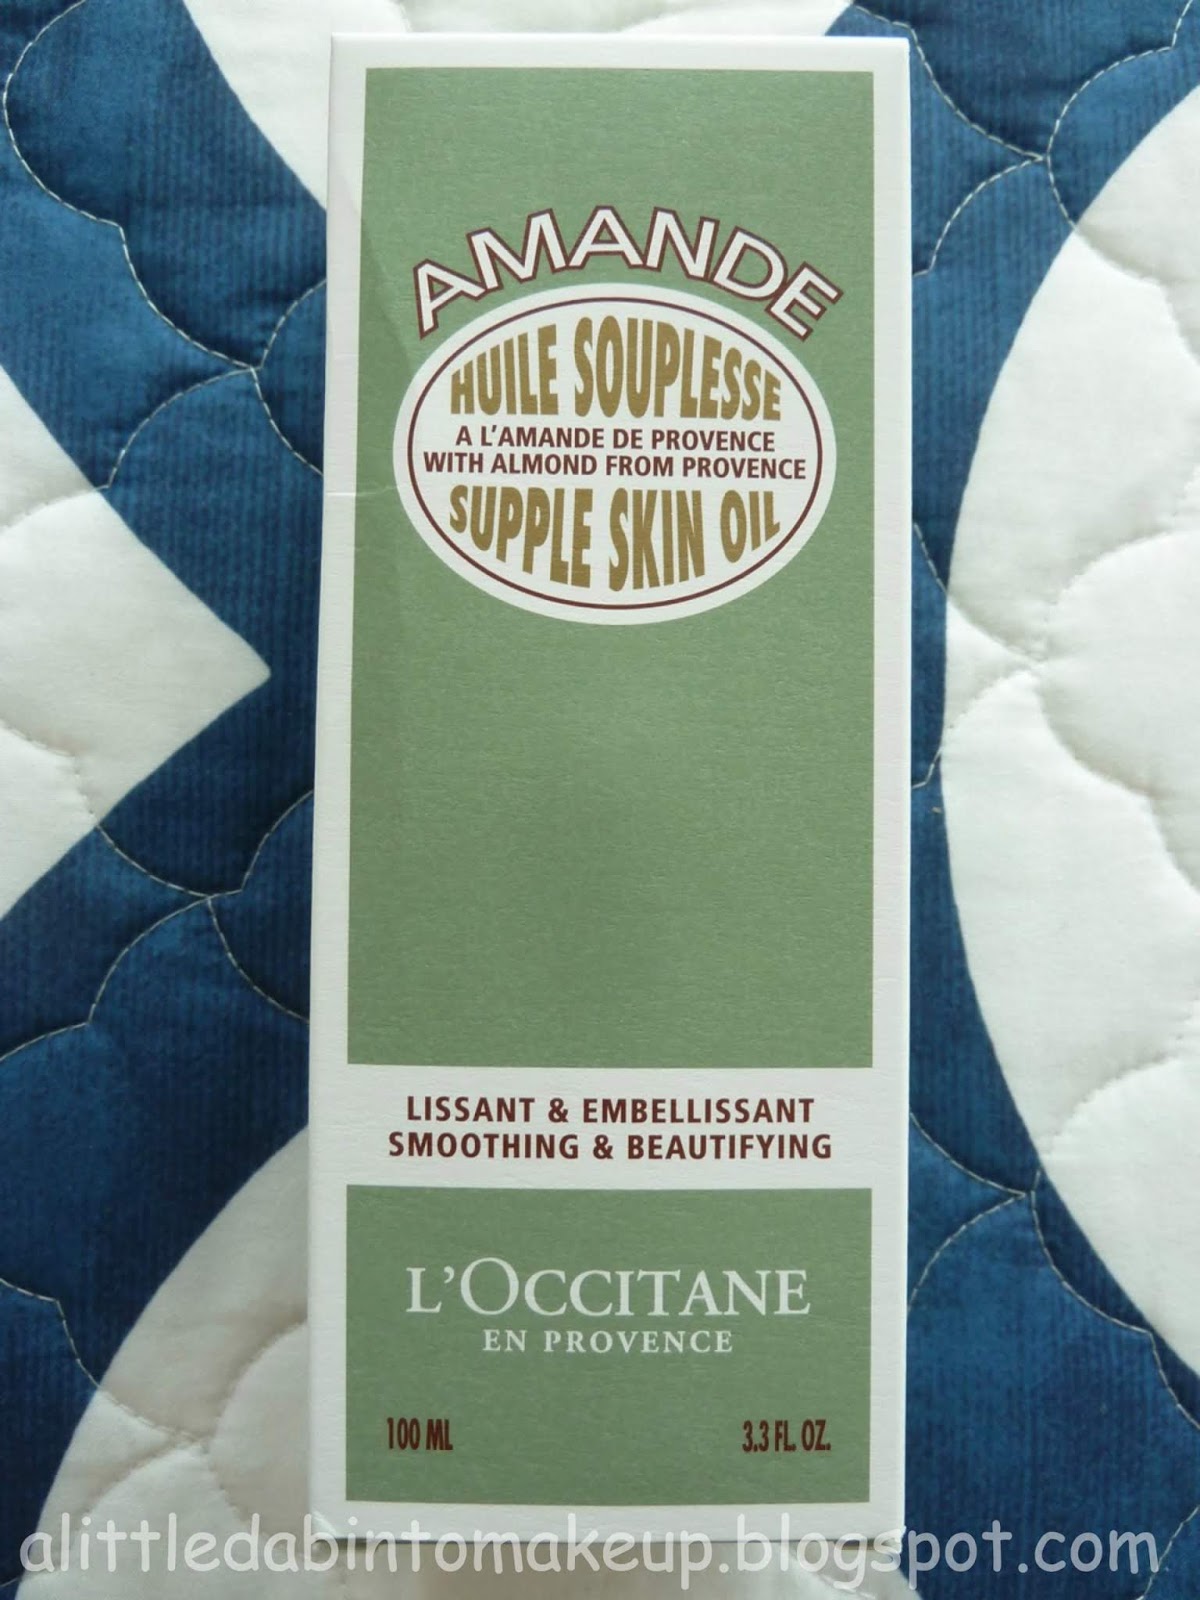 Of Toys and Co: L'Occitane Almond Supple Skin Oil